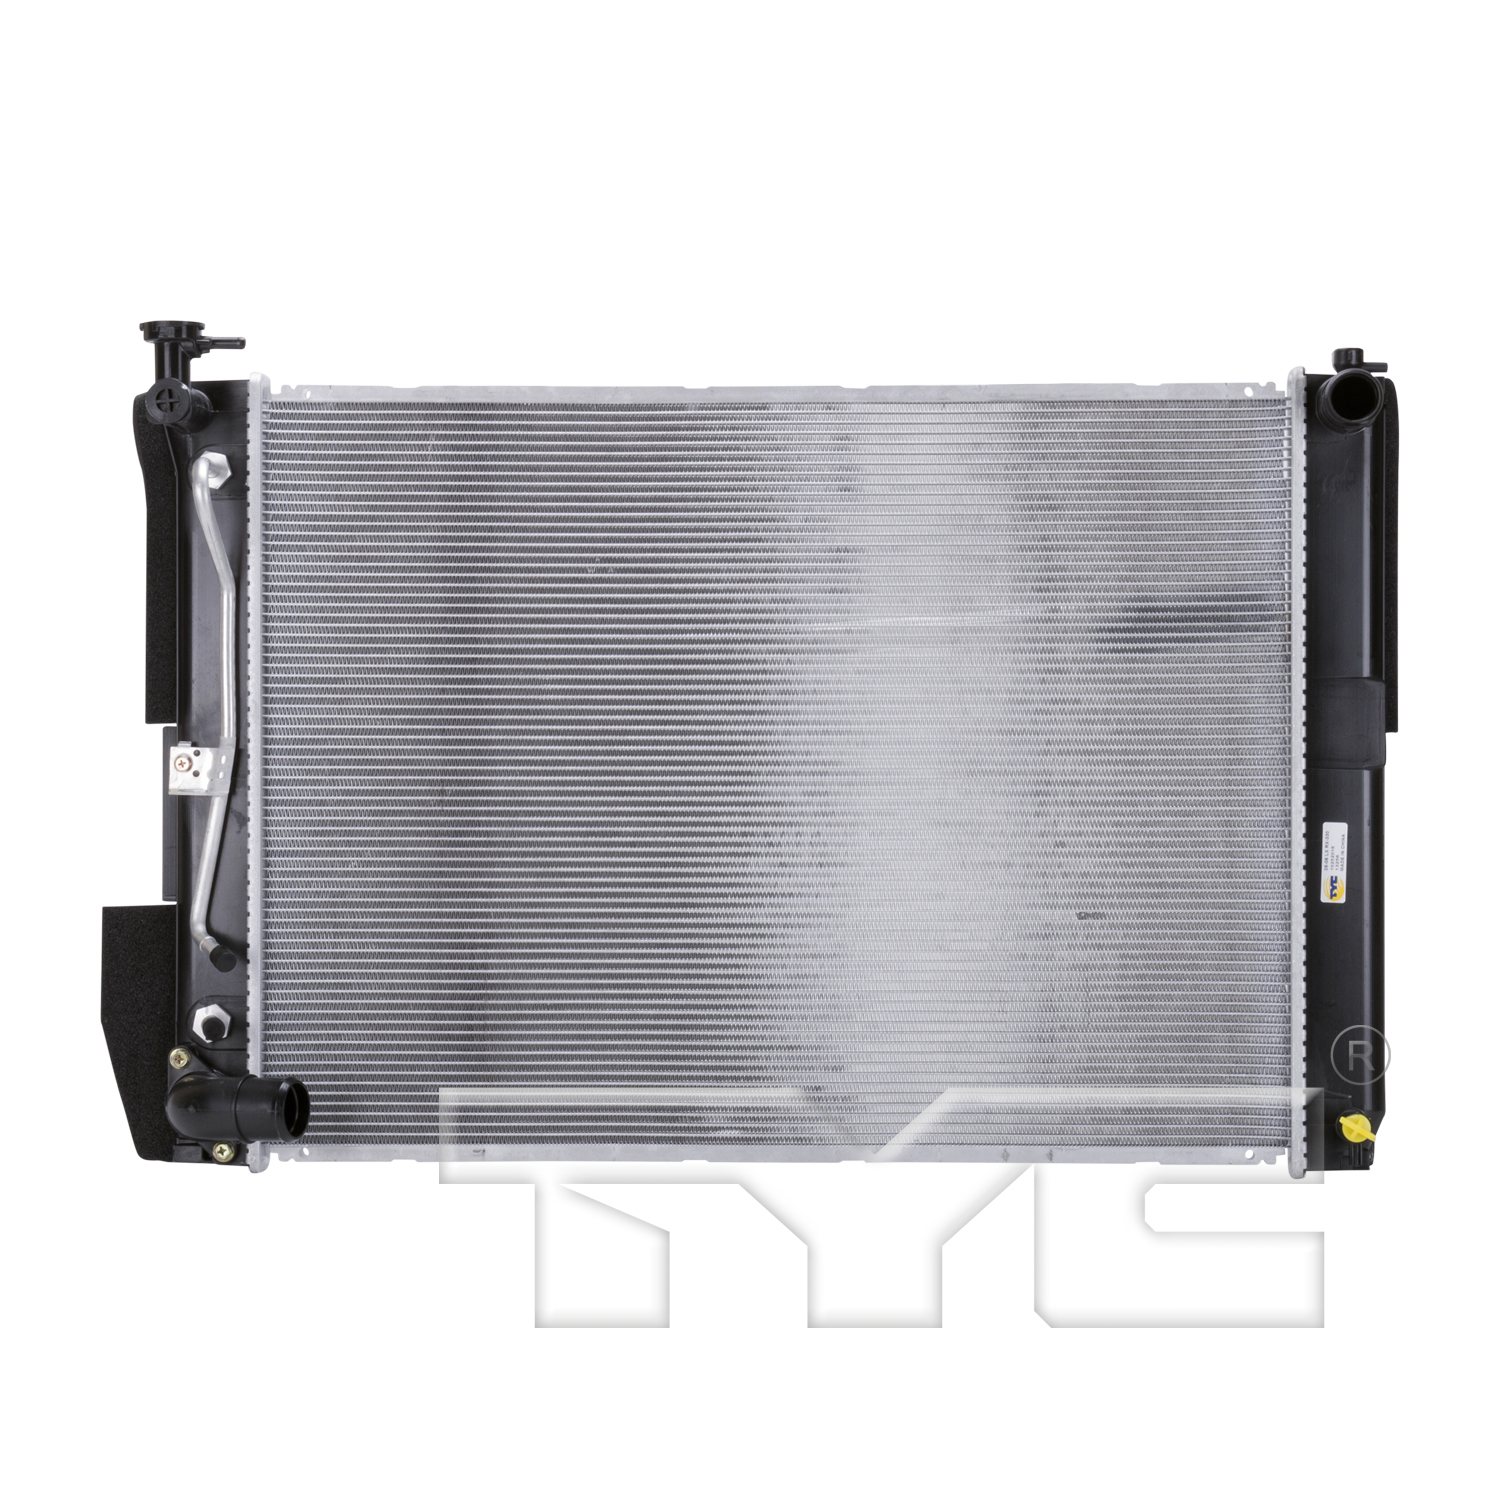 Aftermarket RADIATORS for LEXUS - RX330, RX330,05-06,Radiator assembly